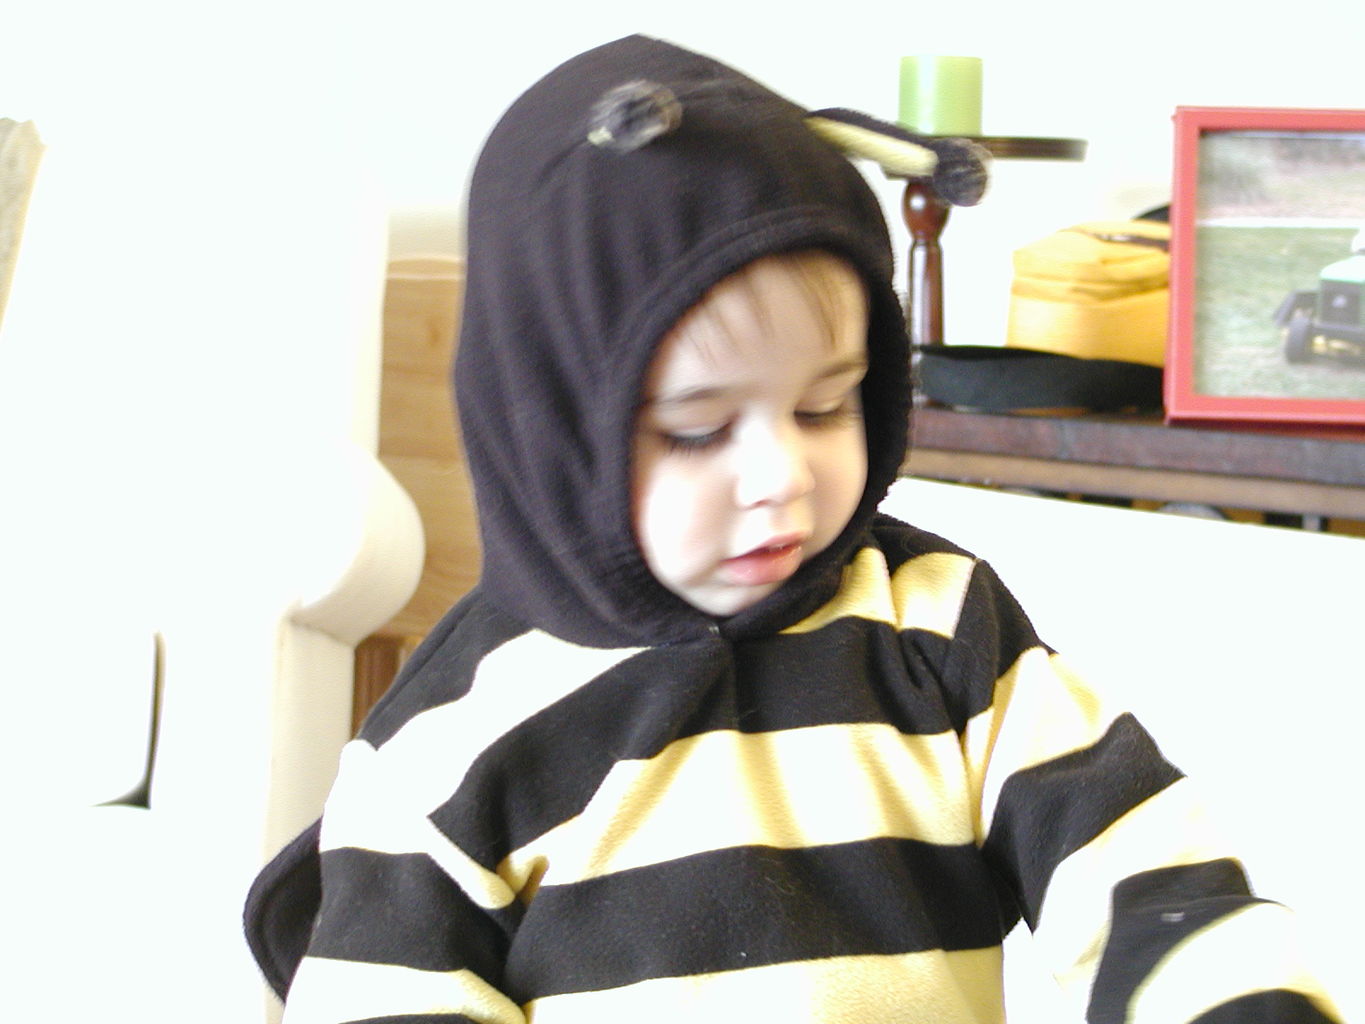 James in Bumblebee Outfit
